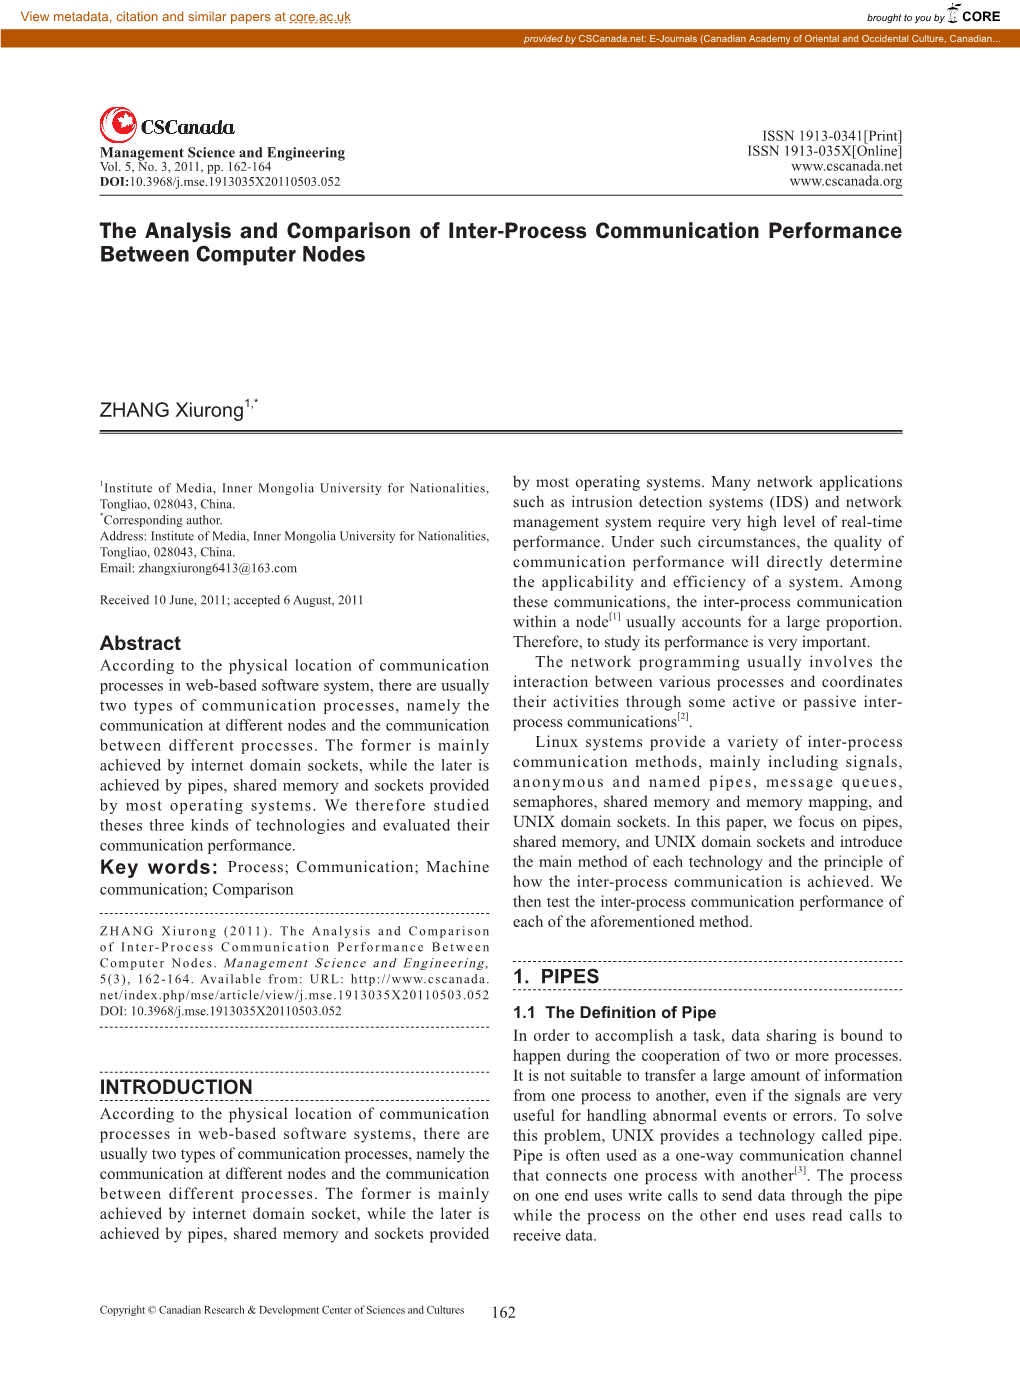 The Analysis and Comparison of Inter-Process Communication Performance Between Computer Nodes